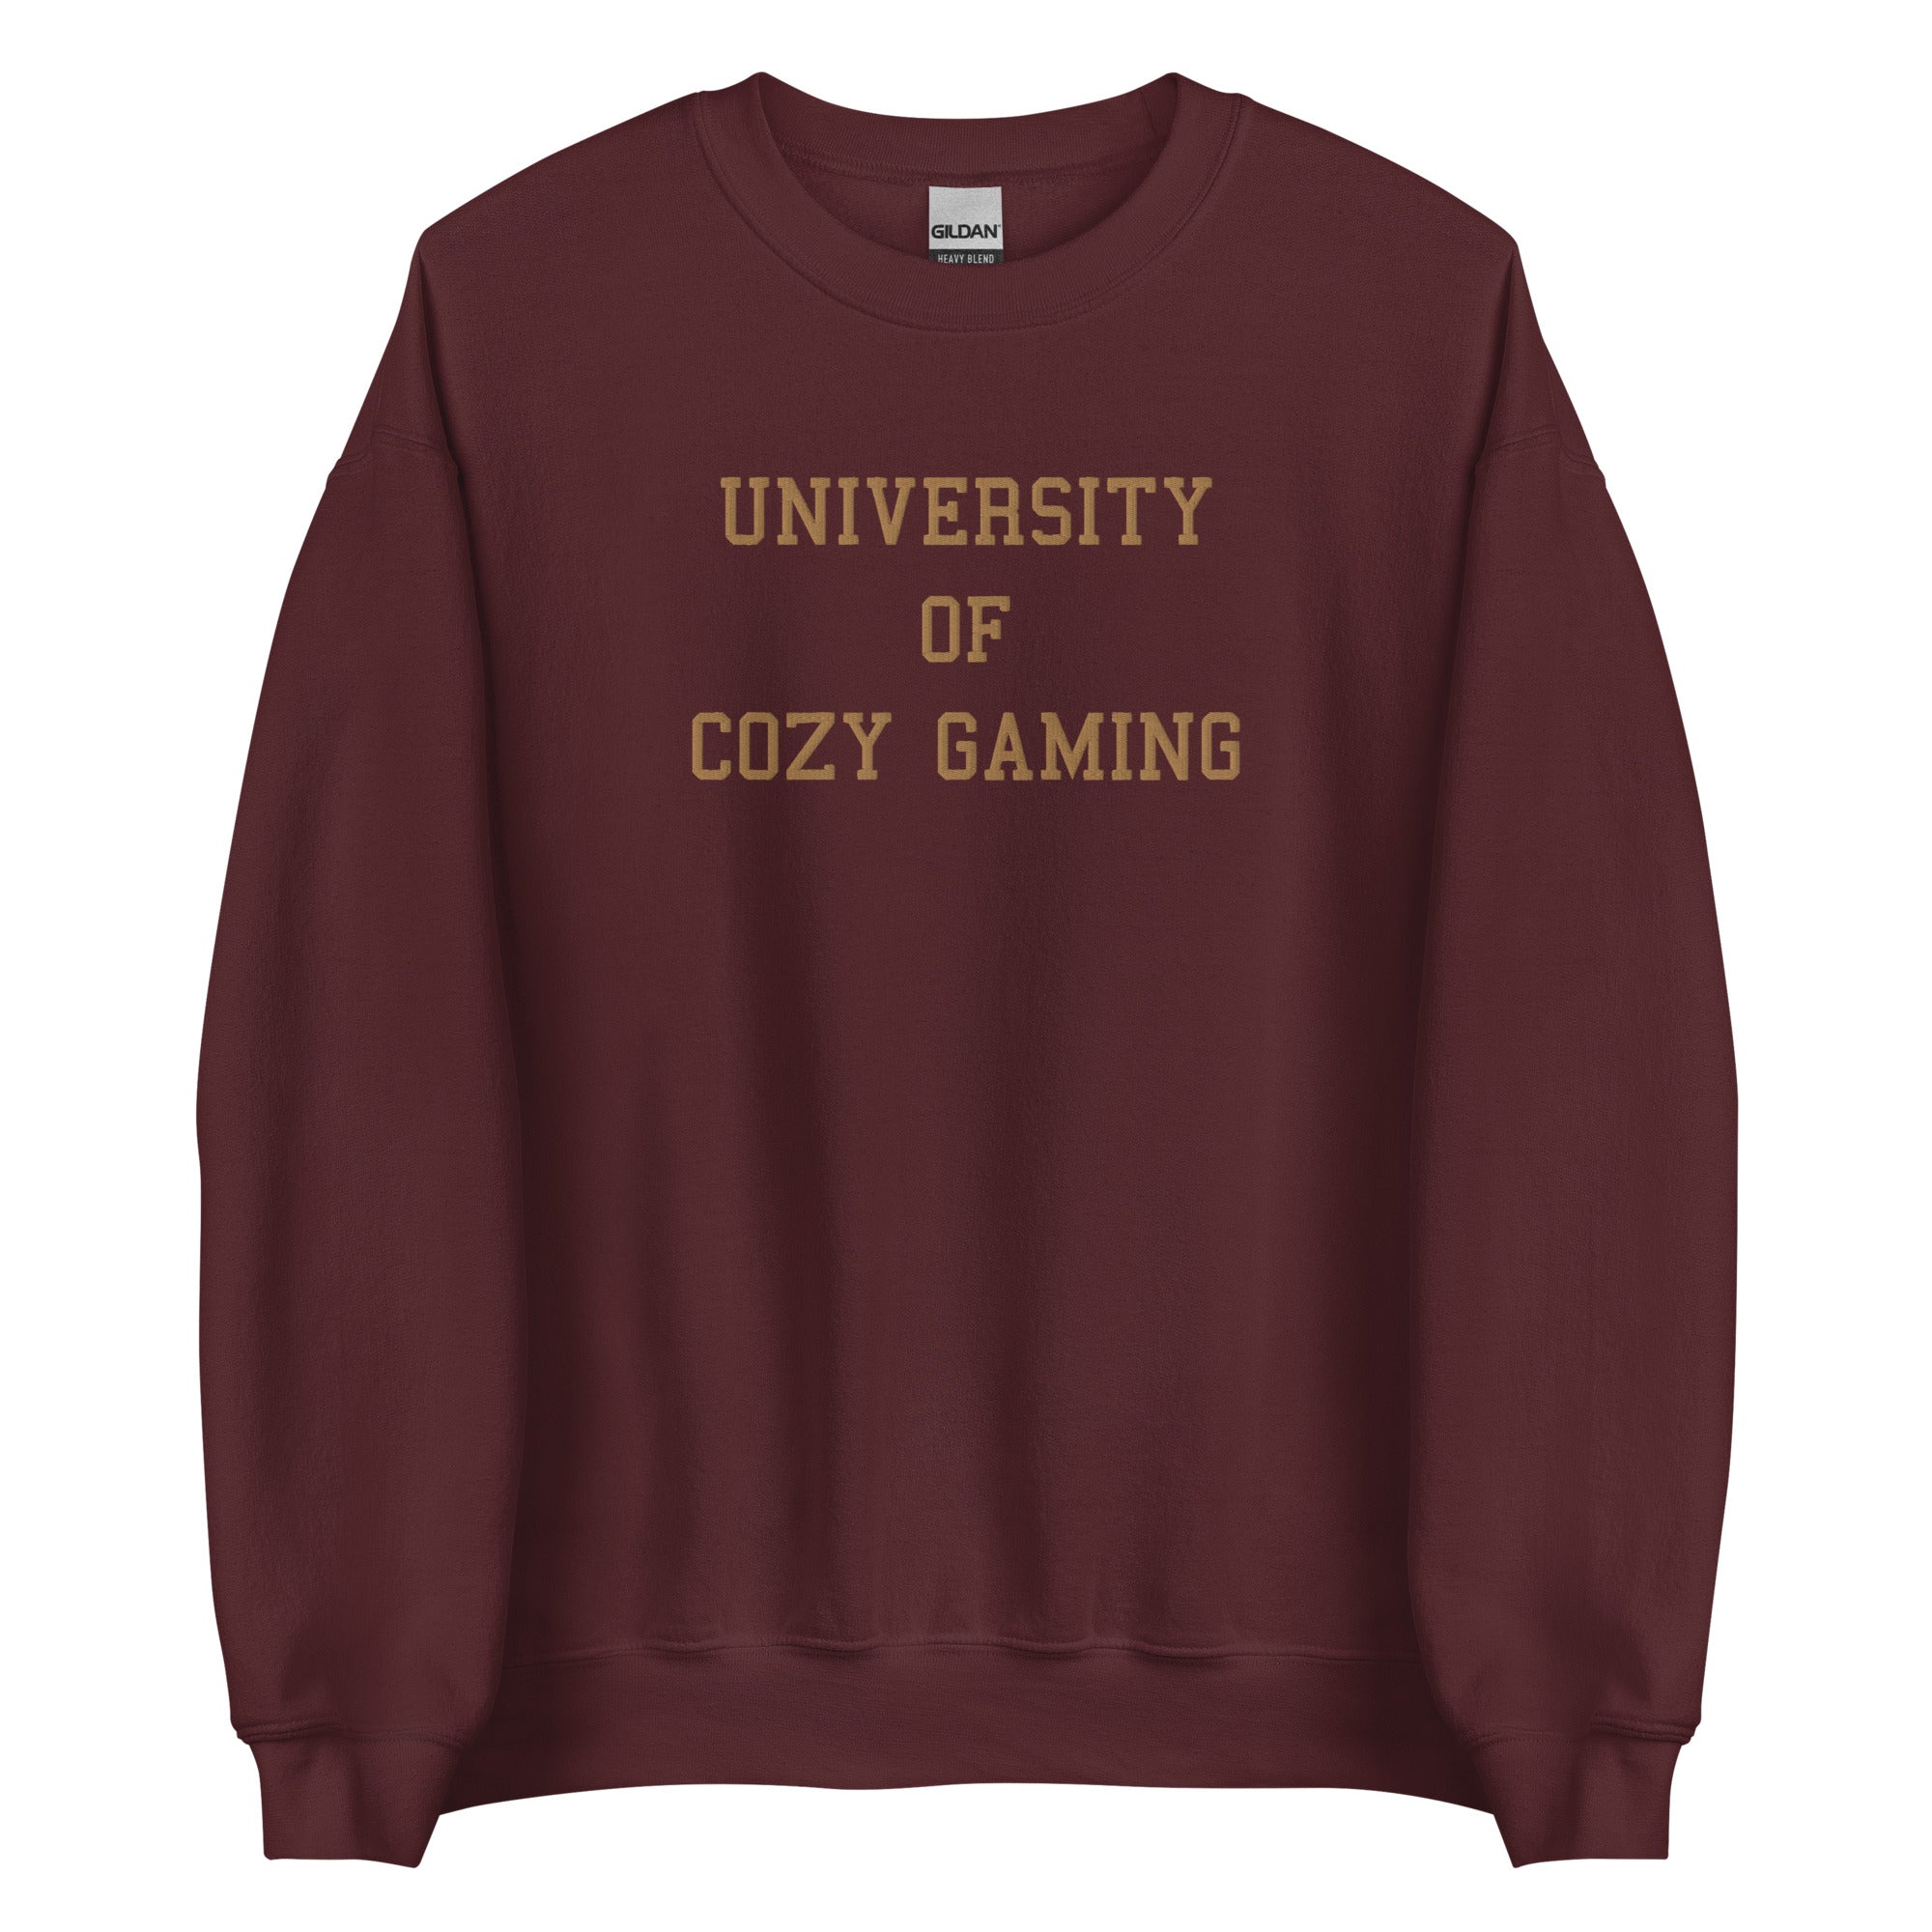 University of Cozy Gaming | Embroidered Unisex Sweatshirt | Coy Gamer Threads and Thistles Inventory Maroon S 